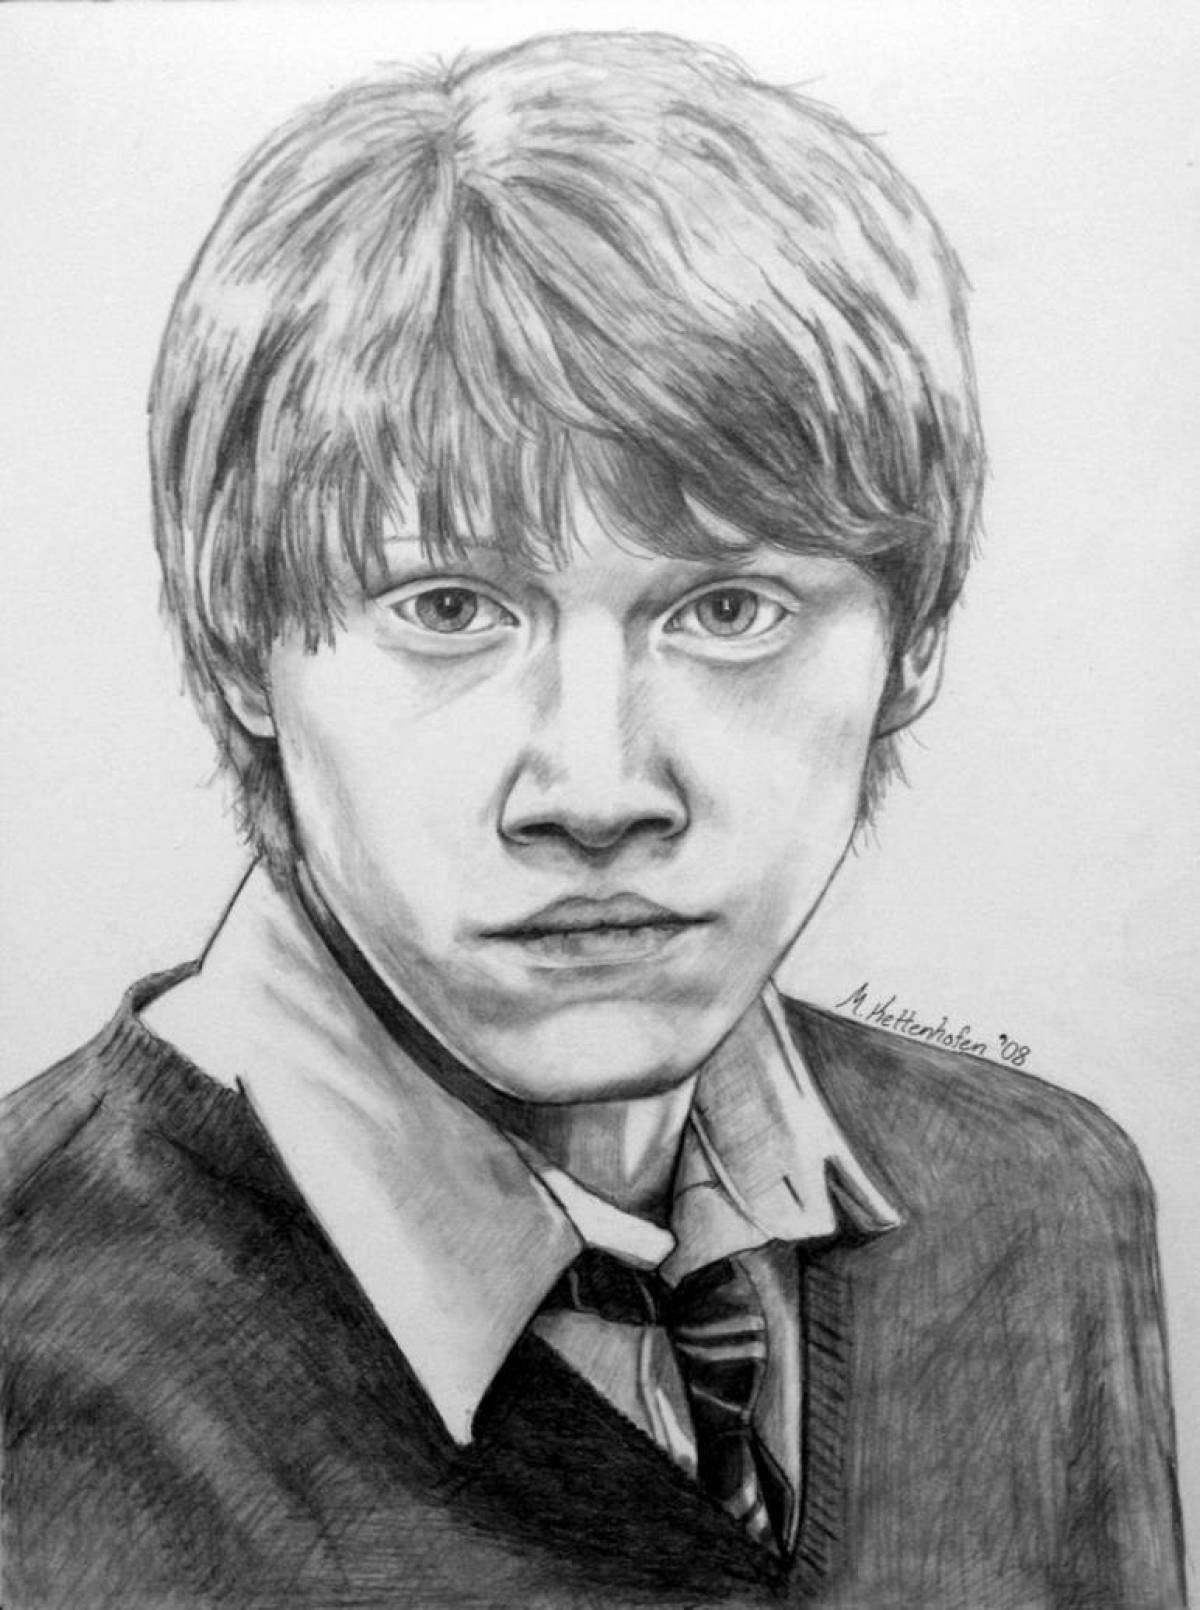 Ron Weasley's thrilling coloring book